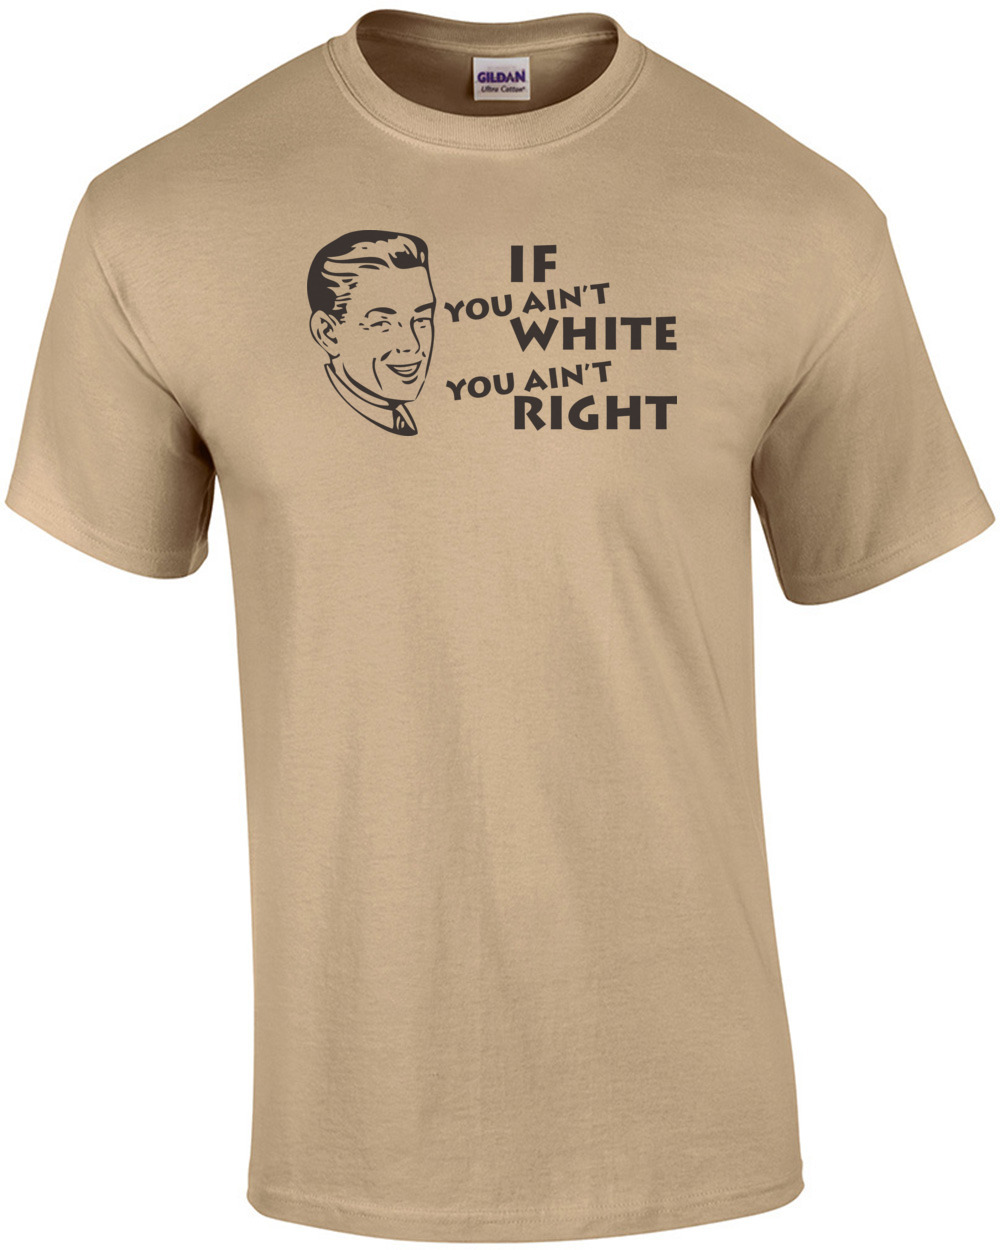 If You Ain't White You Ain't Right T-shirt | eBay